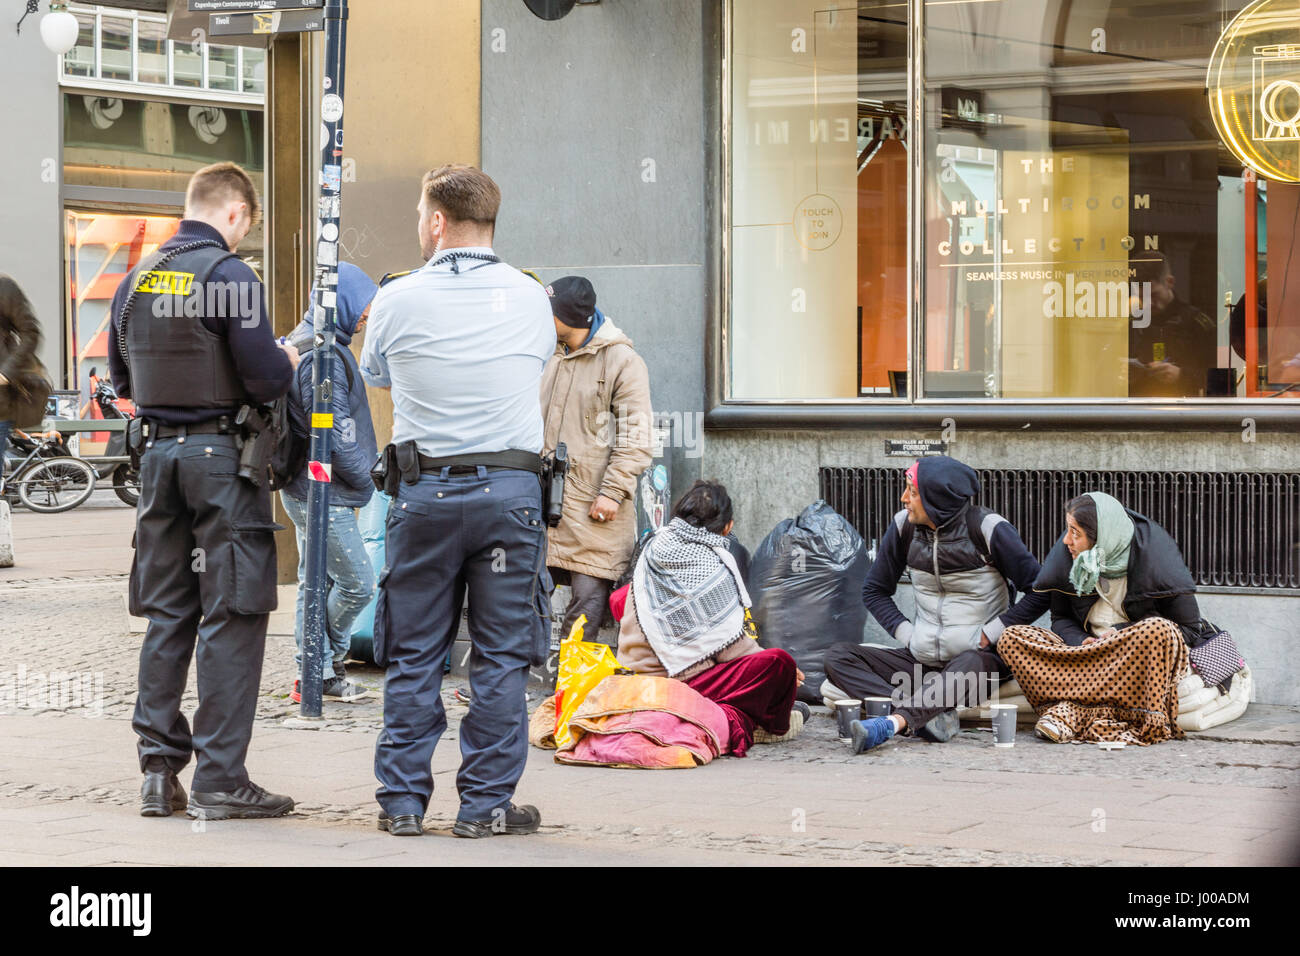 Two policemen looking at the documents of some immigrants, who are sitting on the street. Copenhagen, Denmark - April 6, 2017 Stock Photo